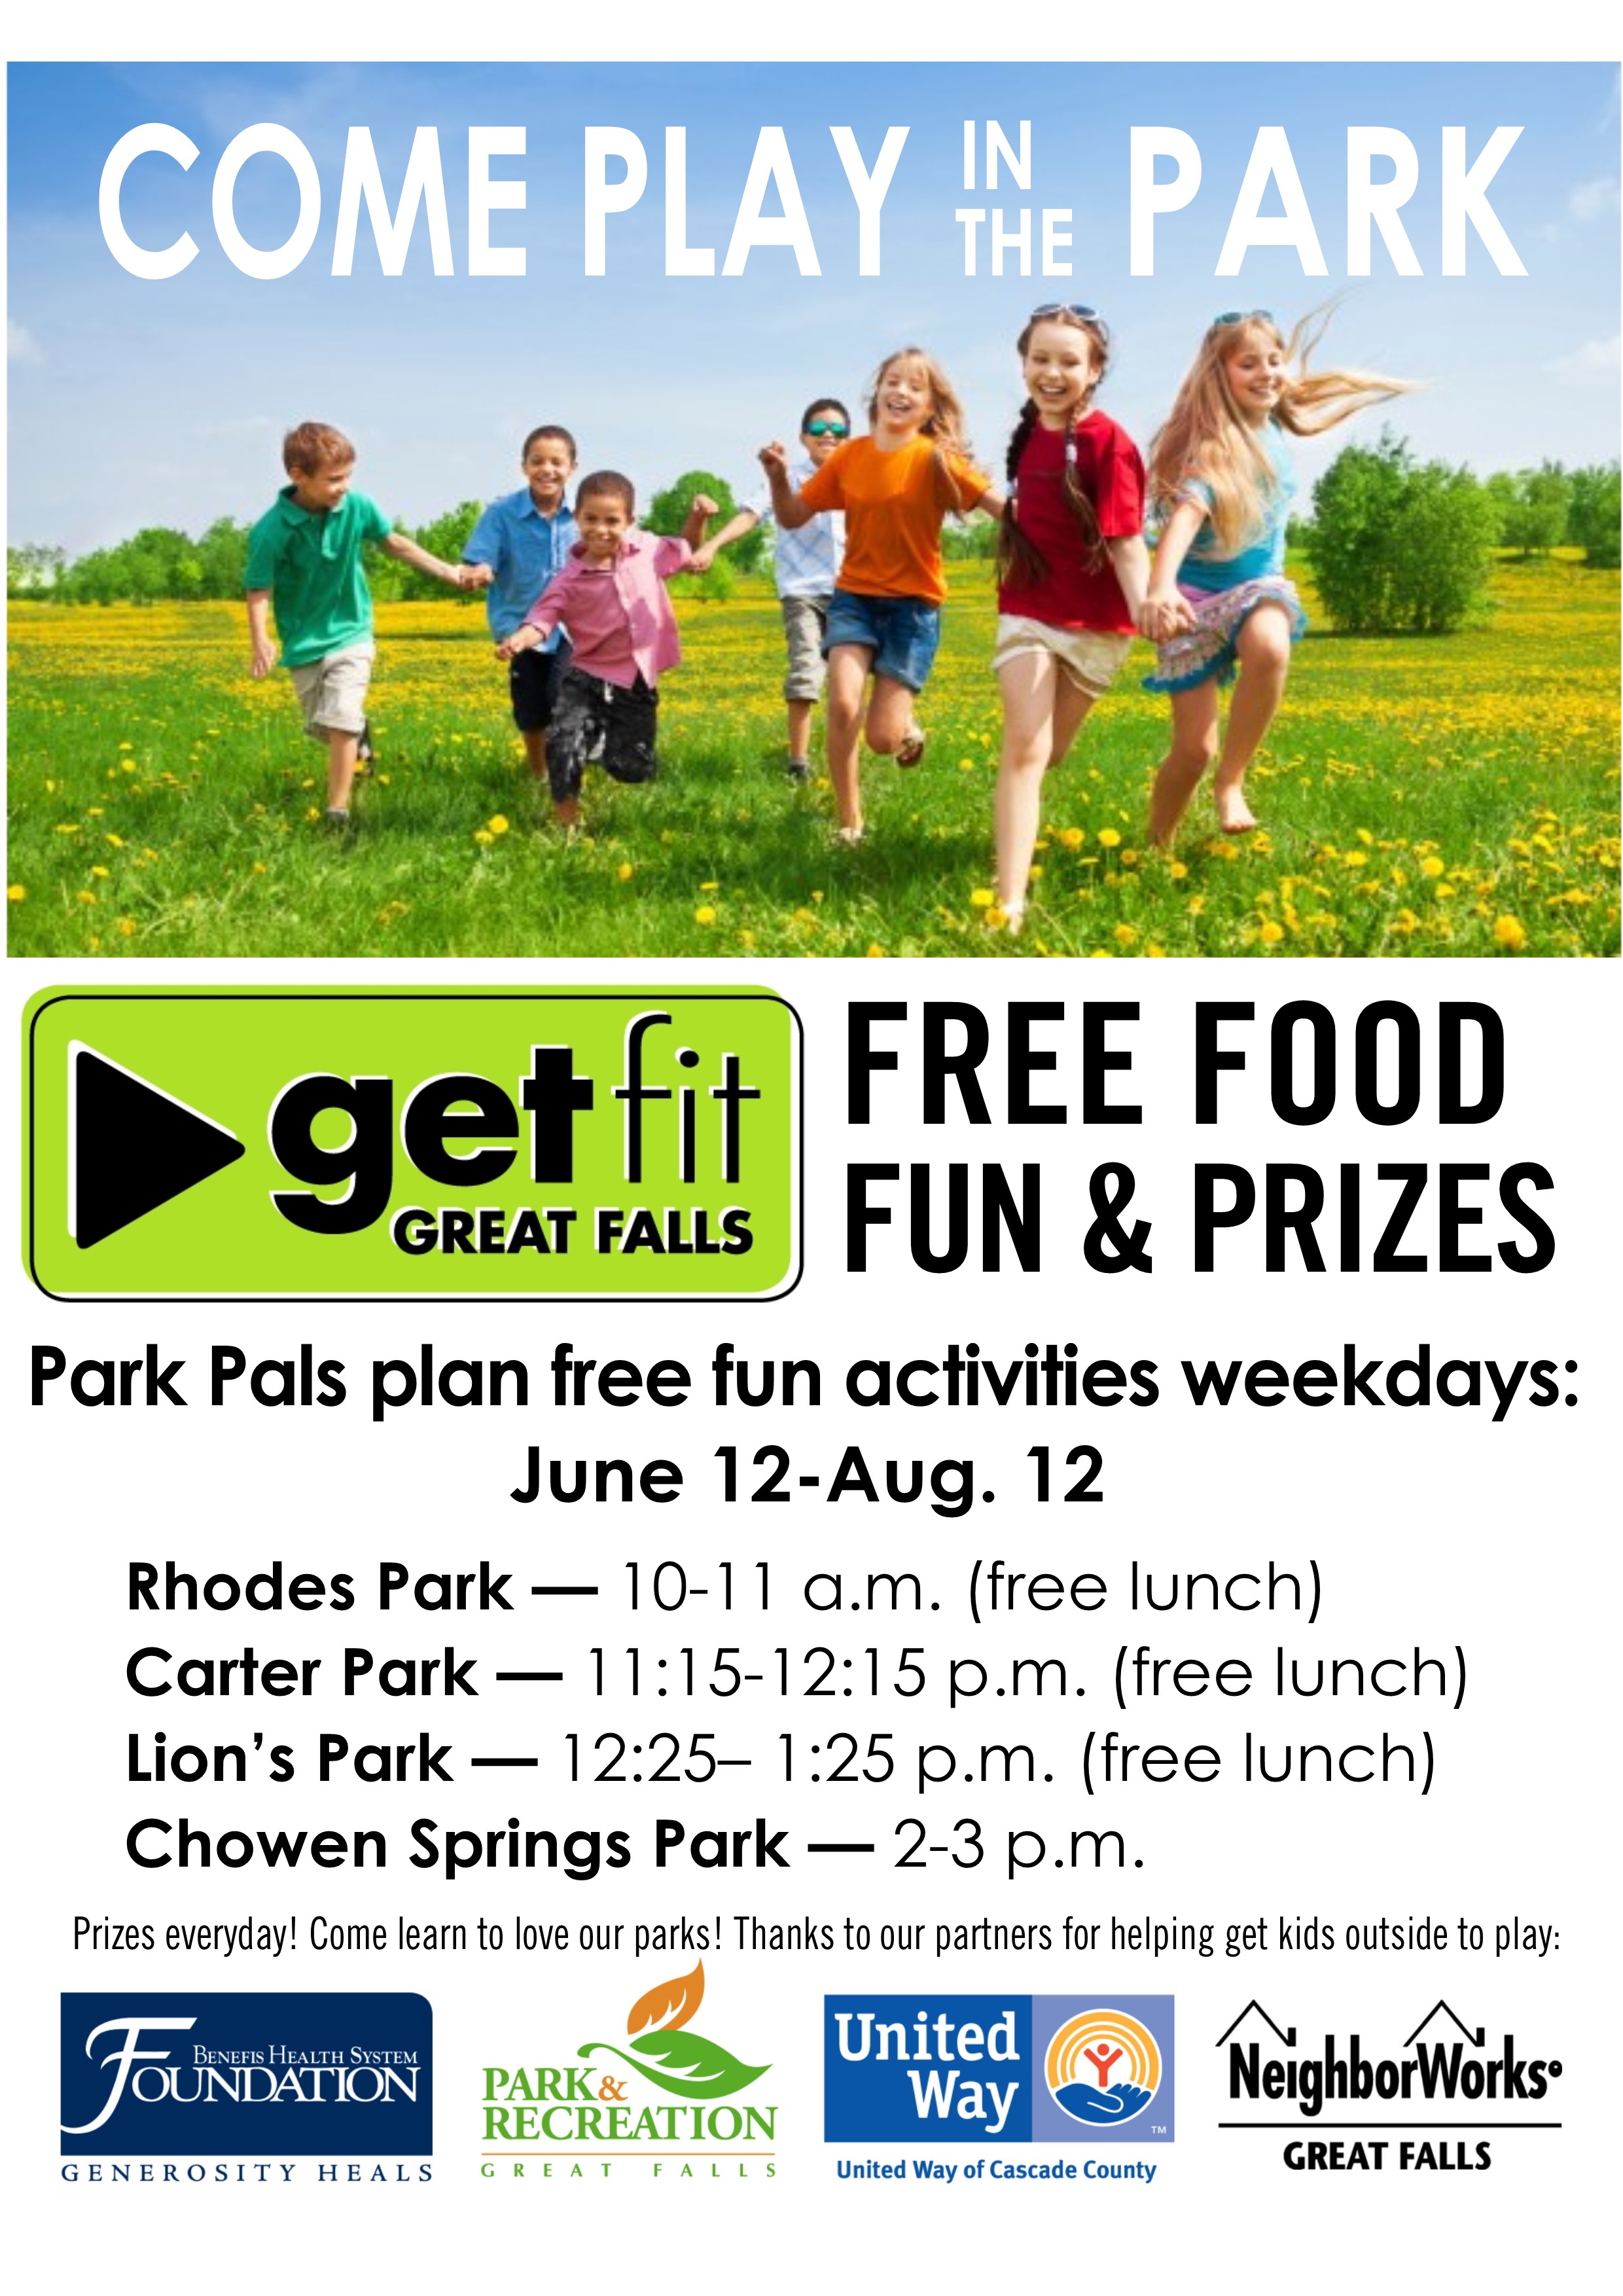 GET FIT GREAT FALLS LAUNCHES PARK PLAY 